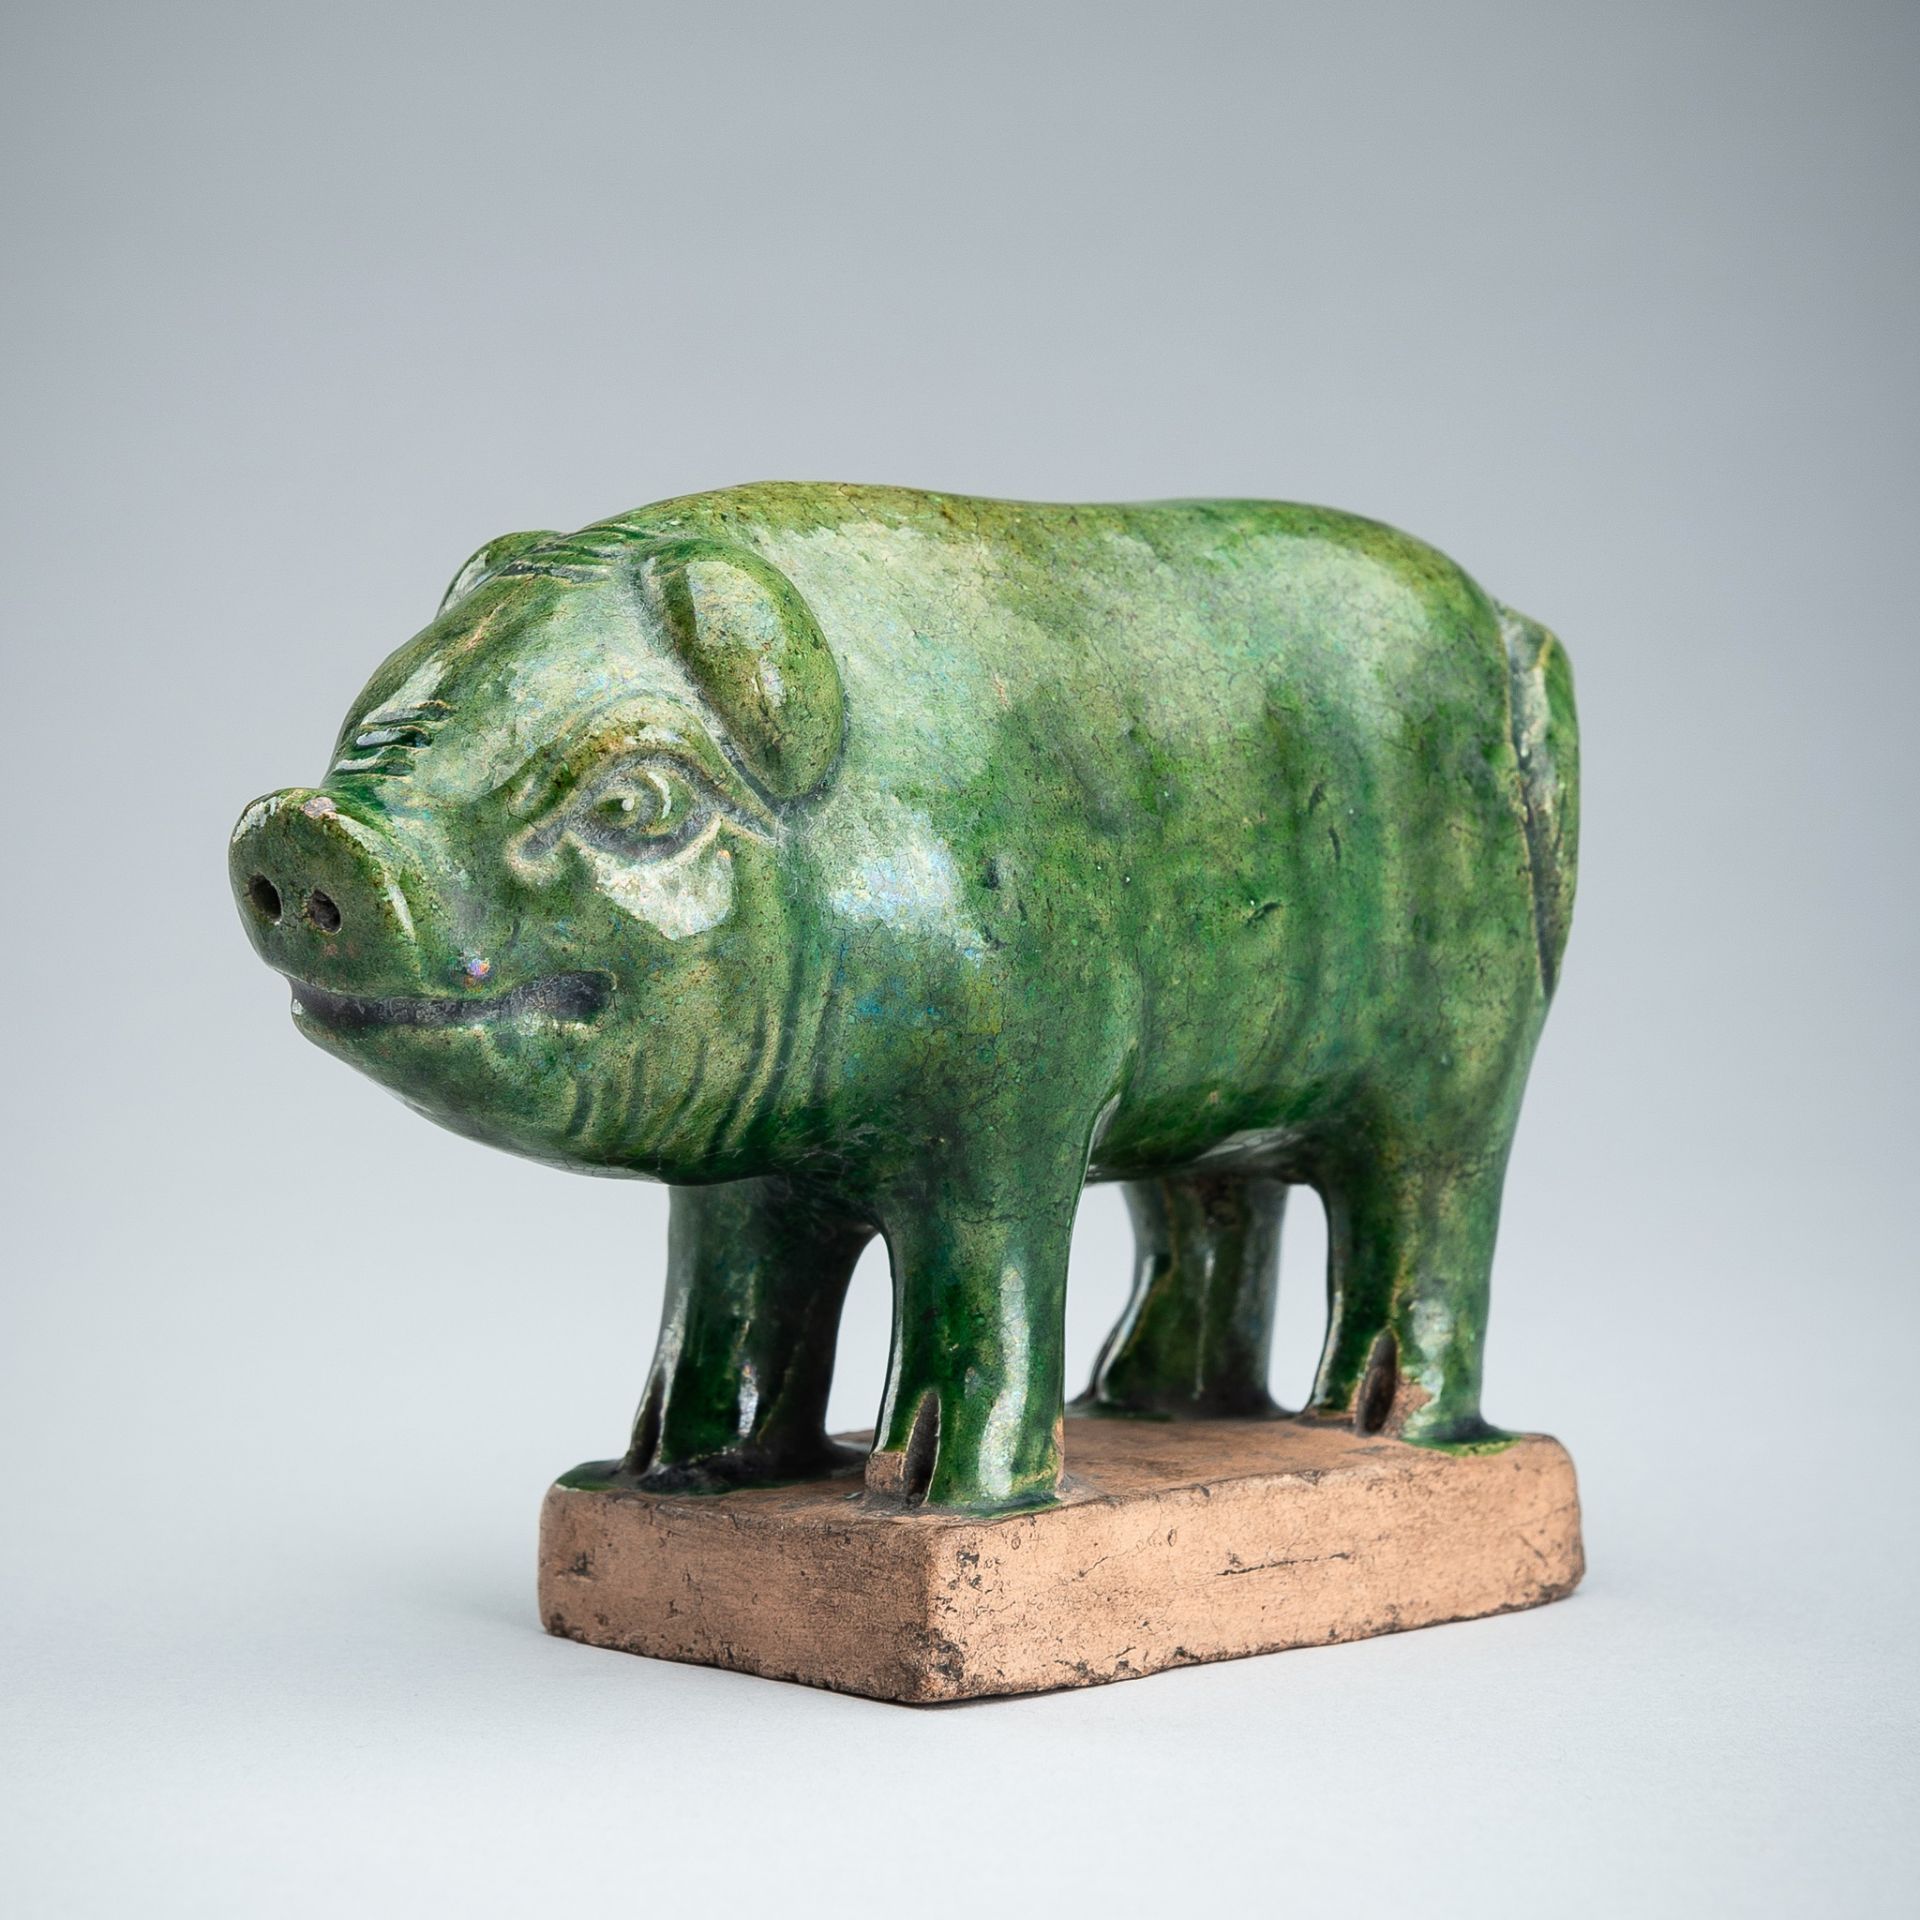 AN EMERALD-GREEN GLAZED POTTERY PIG, MING DYNASTY